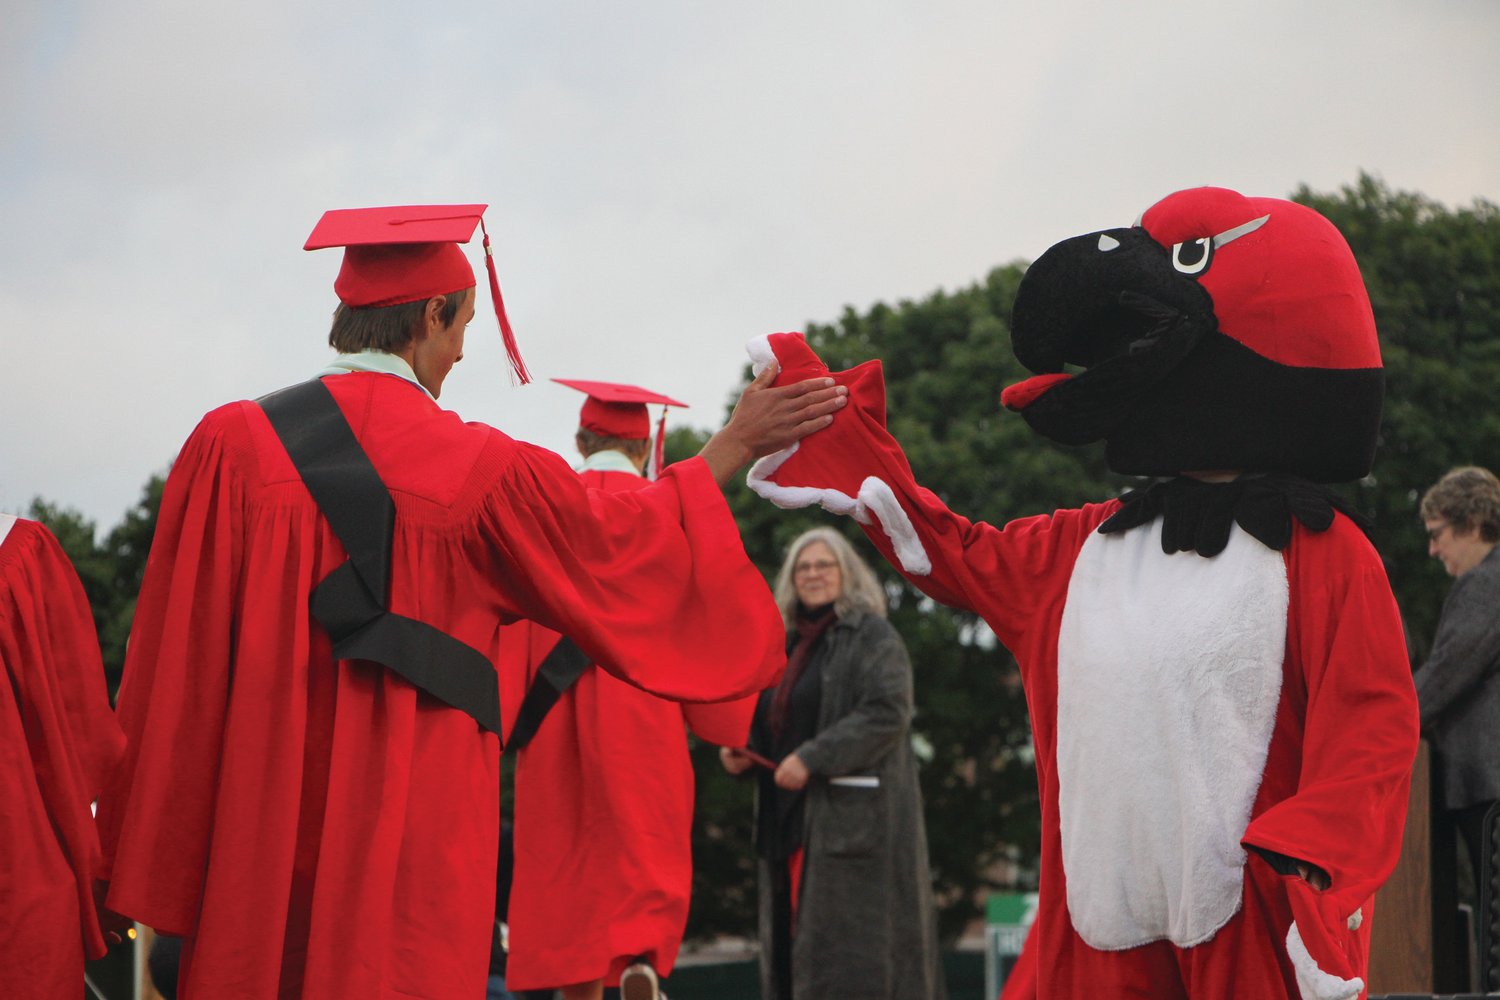 After giving the Redhawk mascot a high-five, students bounded across the stage for their diplomas.